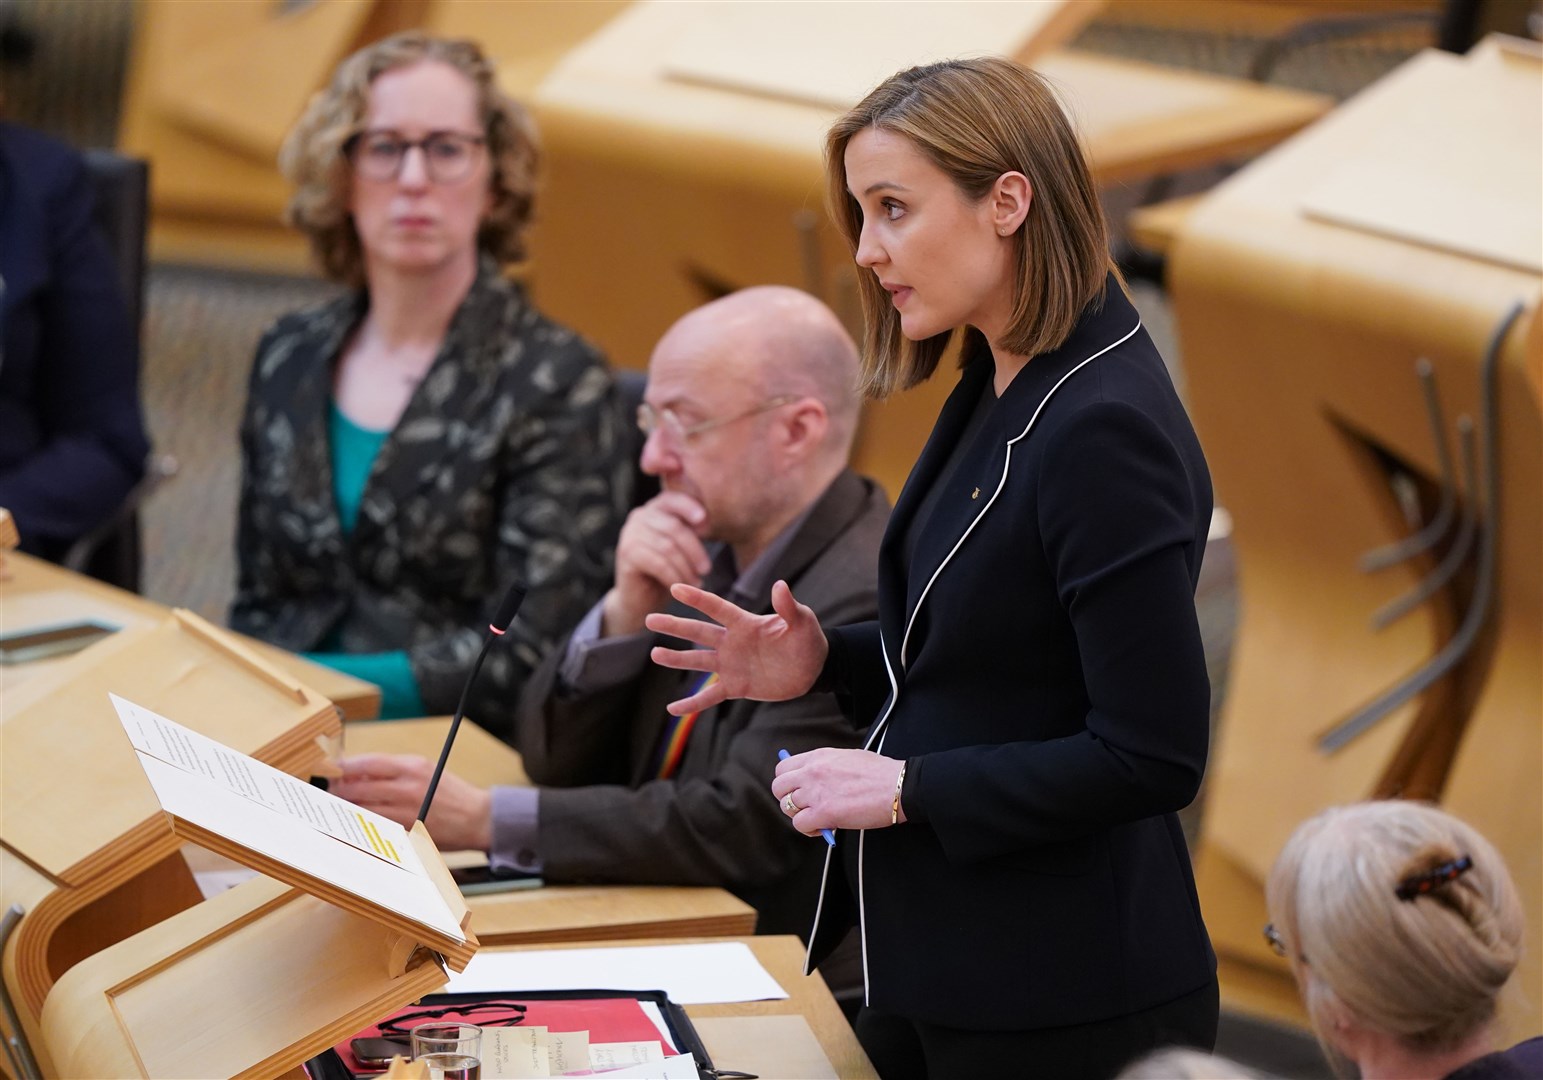 Mairi McAllan confirmed the interim target has been scrapped in a statement to Parliament (Andrew Milligan/PA)